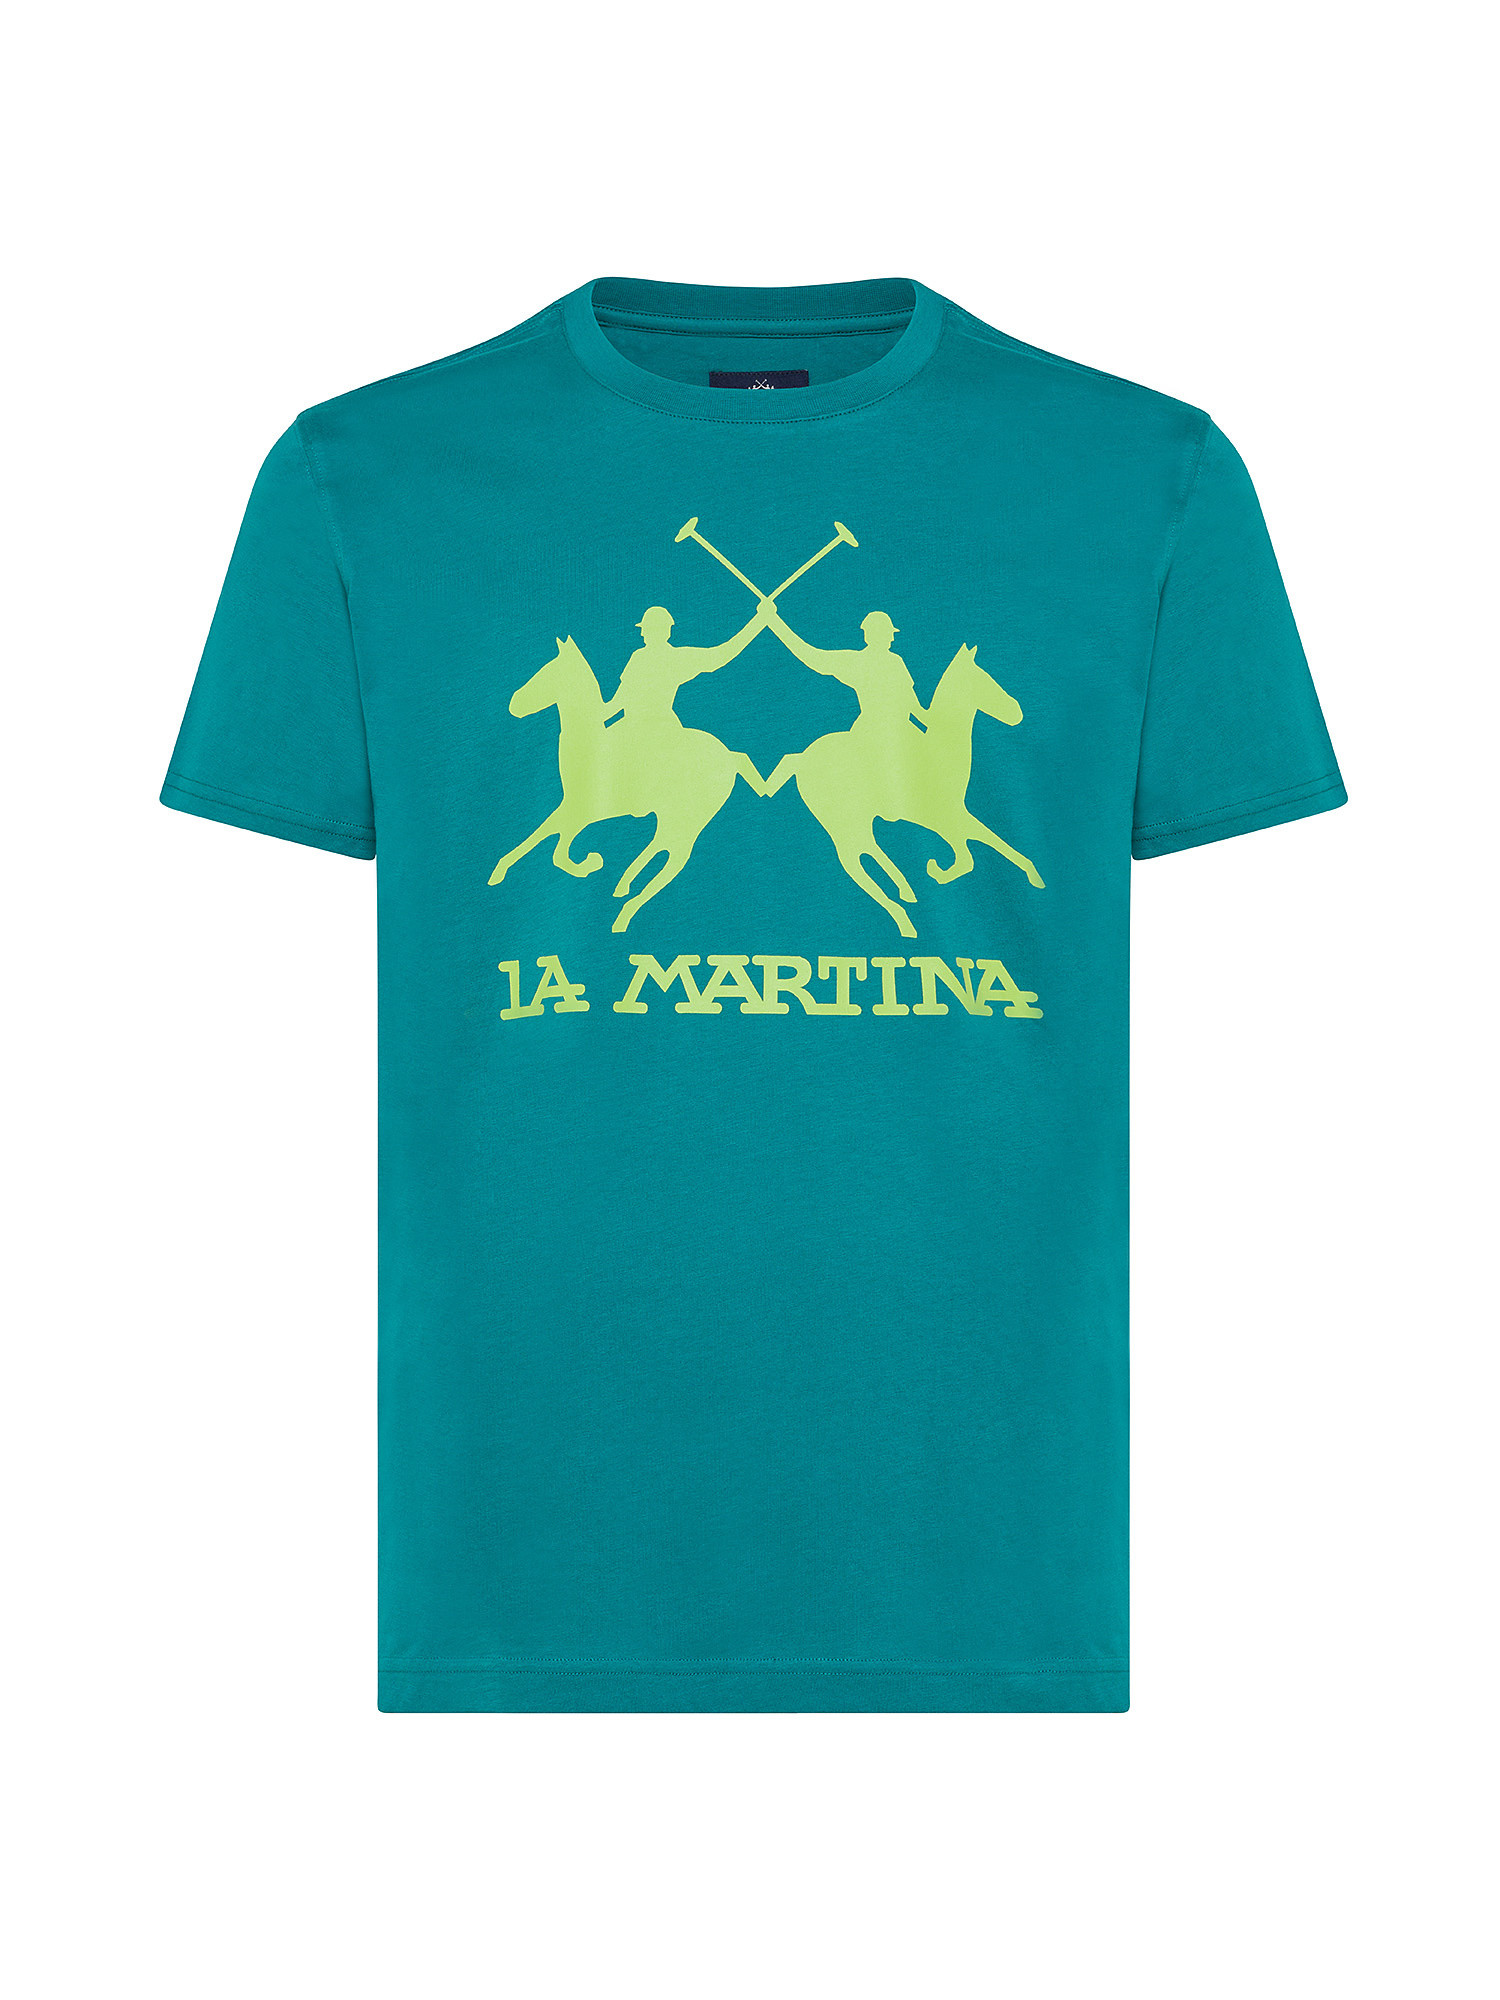 La Martina - Short-sleeved T-shirt in jersey cotton, Green, large image number 0